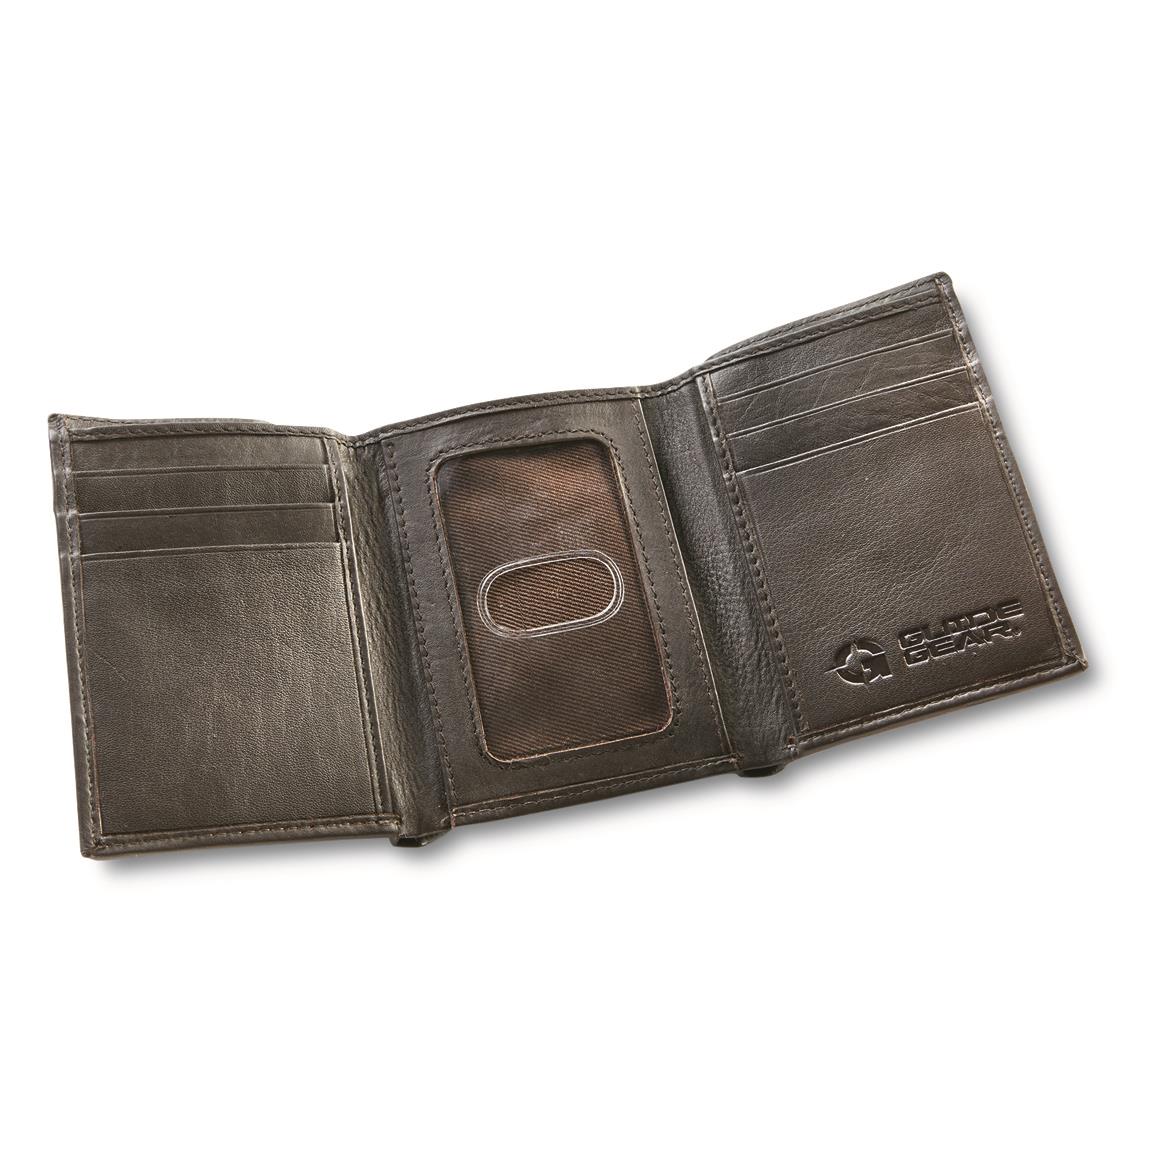 Guide Gear Leather RFID Wallet, Tri-fold, Brown